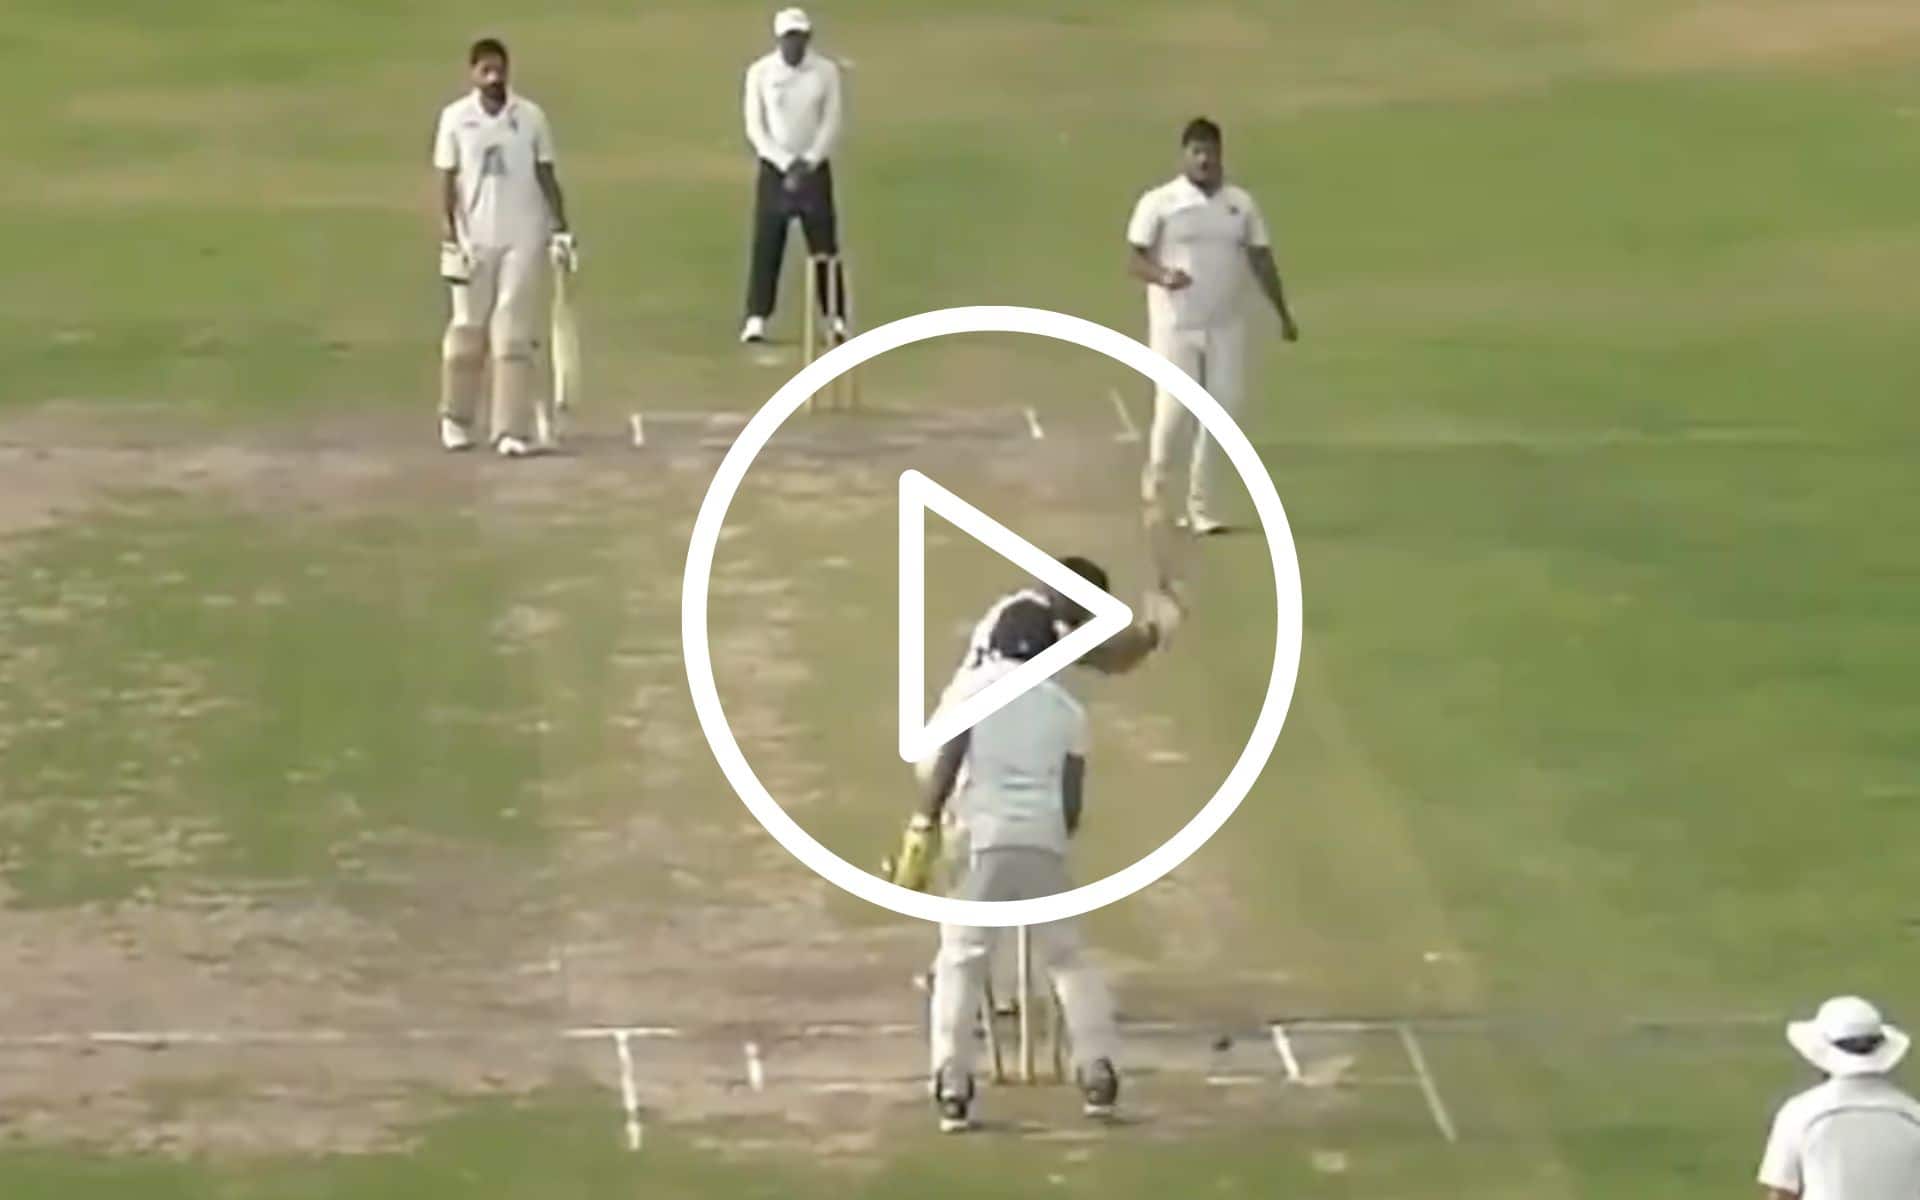 [Watch] Match-Fixing Evidence Emerges In Live Kolkata Club Cricket Match